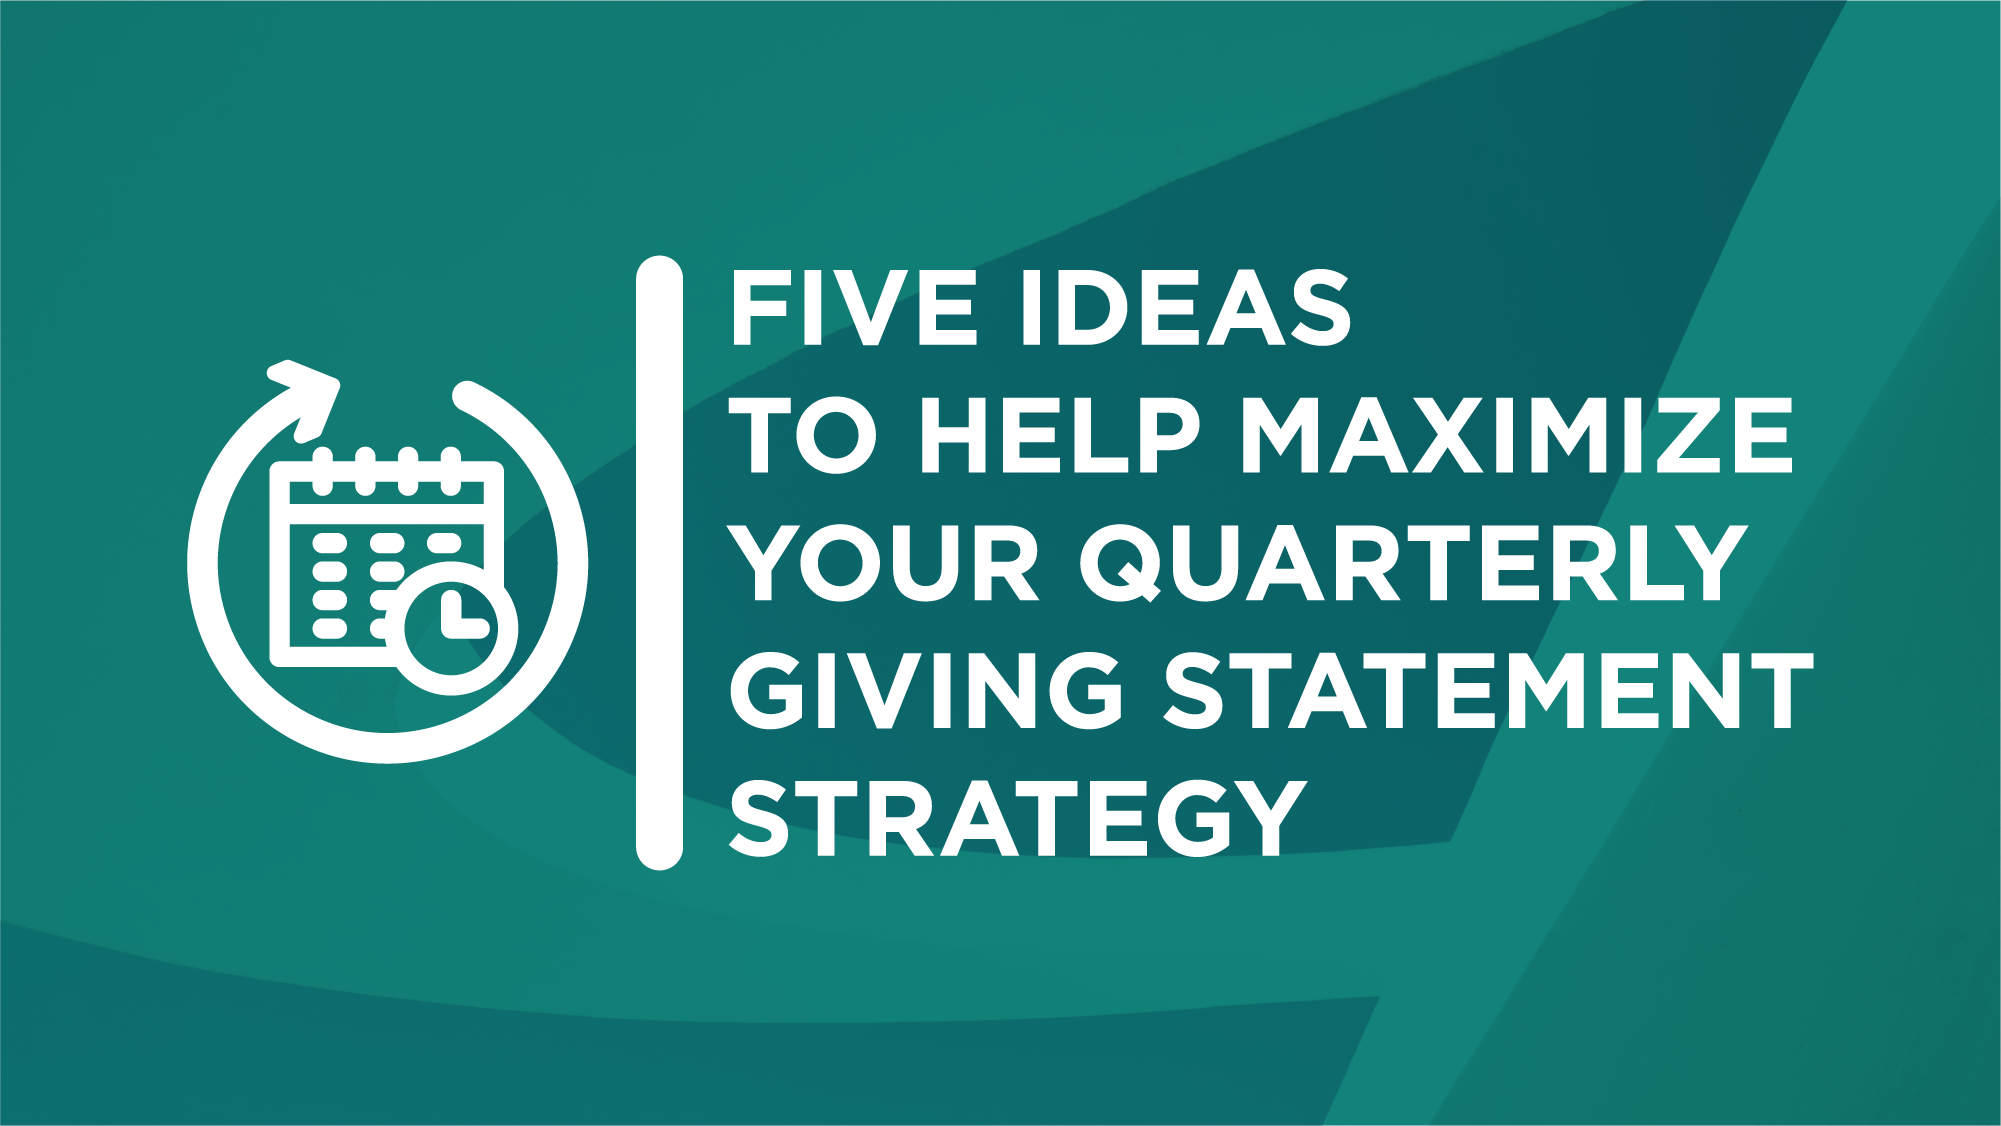 Five Ideas to Help Maximize Your Quarterly Giving Statement Strategy